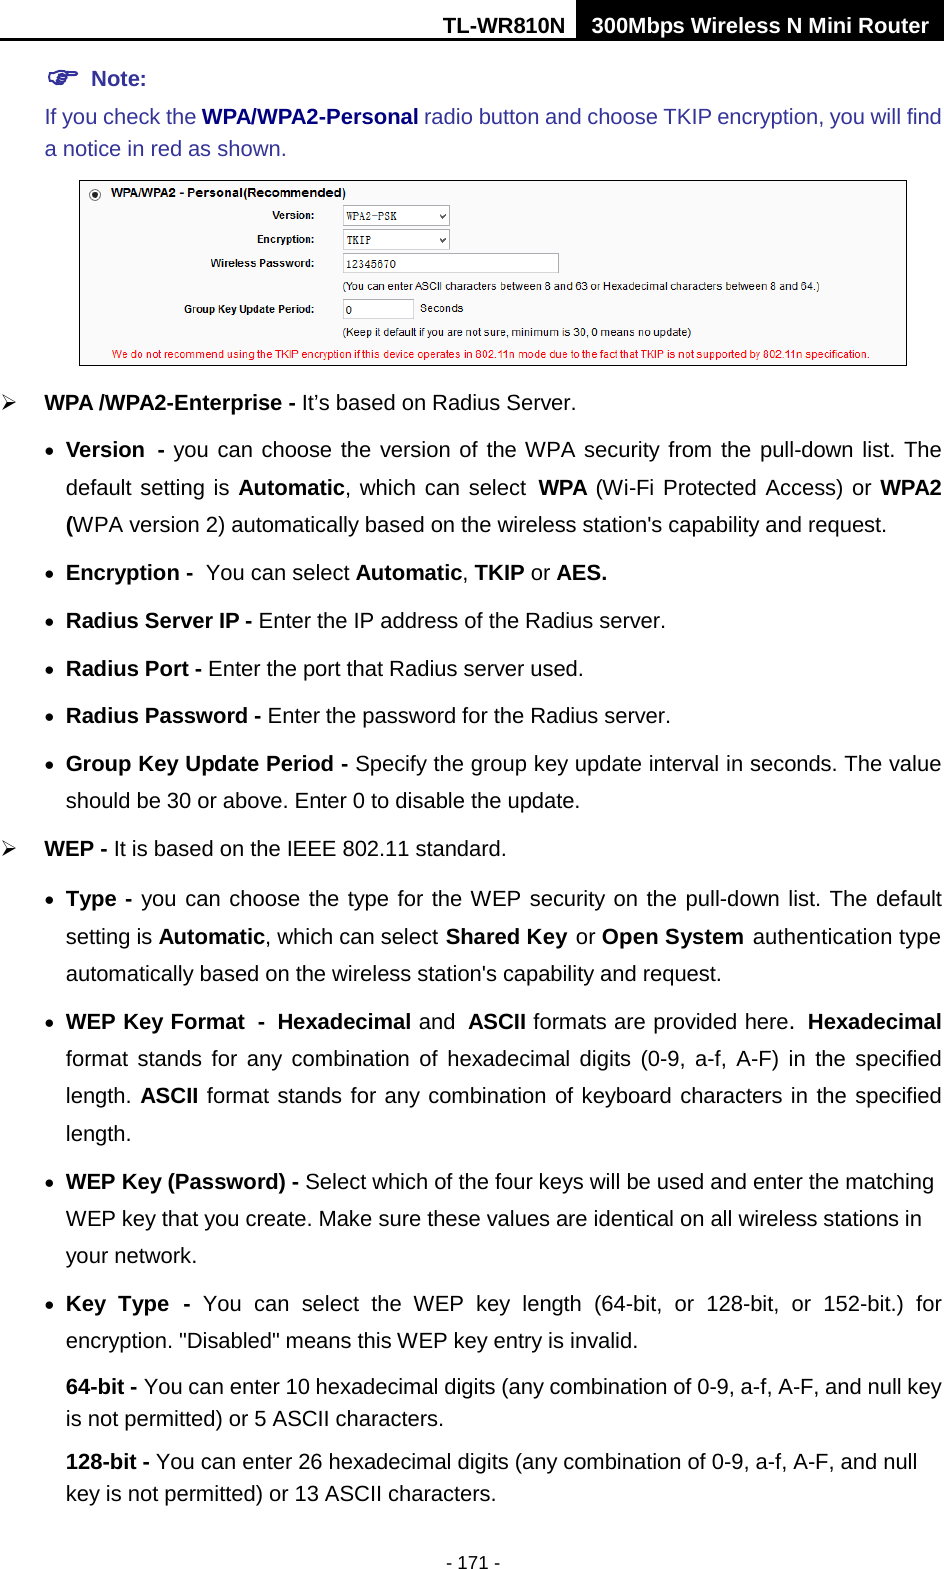 TL-WR810N 300Mbps Wireless N Mini Router  - 171 -  Note:   If you check the WPA/WPA2-Personal radio button and choose TKIP encryption, you will find a notice in red as shown.   WPA /WPA2-Enterprise - It’s based on Radius Server. • Version - you can choose the version of the WPA security from the pull-down list. The default setting is Automatic, which can select WPA (Wi-Fi Protected Access) or WPA2 (WPA version 2) automatically based on the wireless station&apos;s capability and request. • Encryption - You can select Automatic, TKIP or AES. • Radius Server IP - Enter the IP address of the Radius server. • Radius Port - Enter the port that Radius server used. • Radius Password - Enter the password for the Radius server. • Group Key Update Period - Specify the group key update interval in seconds. The value should be 30 or above. Enter 0 to disable the update.  WEP - It is based on the IEEE 802.11 standard.   • Type - you can choose the type for the WEP security on the pull-down list. The default setting is Automatic, which can select Shared Key or Open System authentication type automatically based on the wireless station&apos;s capability and request. • WEP Key Format - Hexadecimal and ASCII formats are provided here. Hexadecimal format stands for any combination of hexadecimal digits (0-9, a-f, A-F) in the specified length. ASCII format stands for any combination of keyboard characters in the specified length.   • WEP Key (Password) - Select which of the four keys will be used and enter the matching WEP key that you create. Make sure these values are identical on all wireless stations in your network.   • Key Type - You can select the WEP key length (64-bit, or 128-bit, or 152-bit.) for encryption. &quot;Disabled&quot; means this WEP key entry is invalid. 64-bit - You can enter 10 hexadecimal digits (any combination of 0-9, a-f, A-F, and null key is not permitted) or 5 ASCII characters.   128-bit - You can enter 26 hexadecimal digits (any combination of 0-9, a-f, A-F, and null key is not permitted) or 13 ASCII characters.   